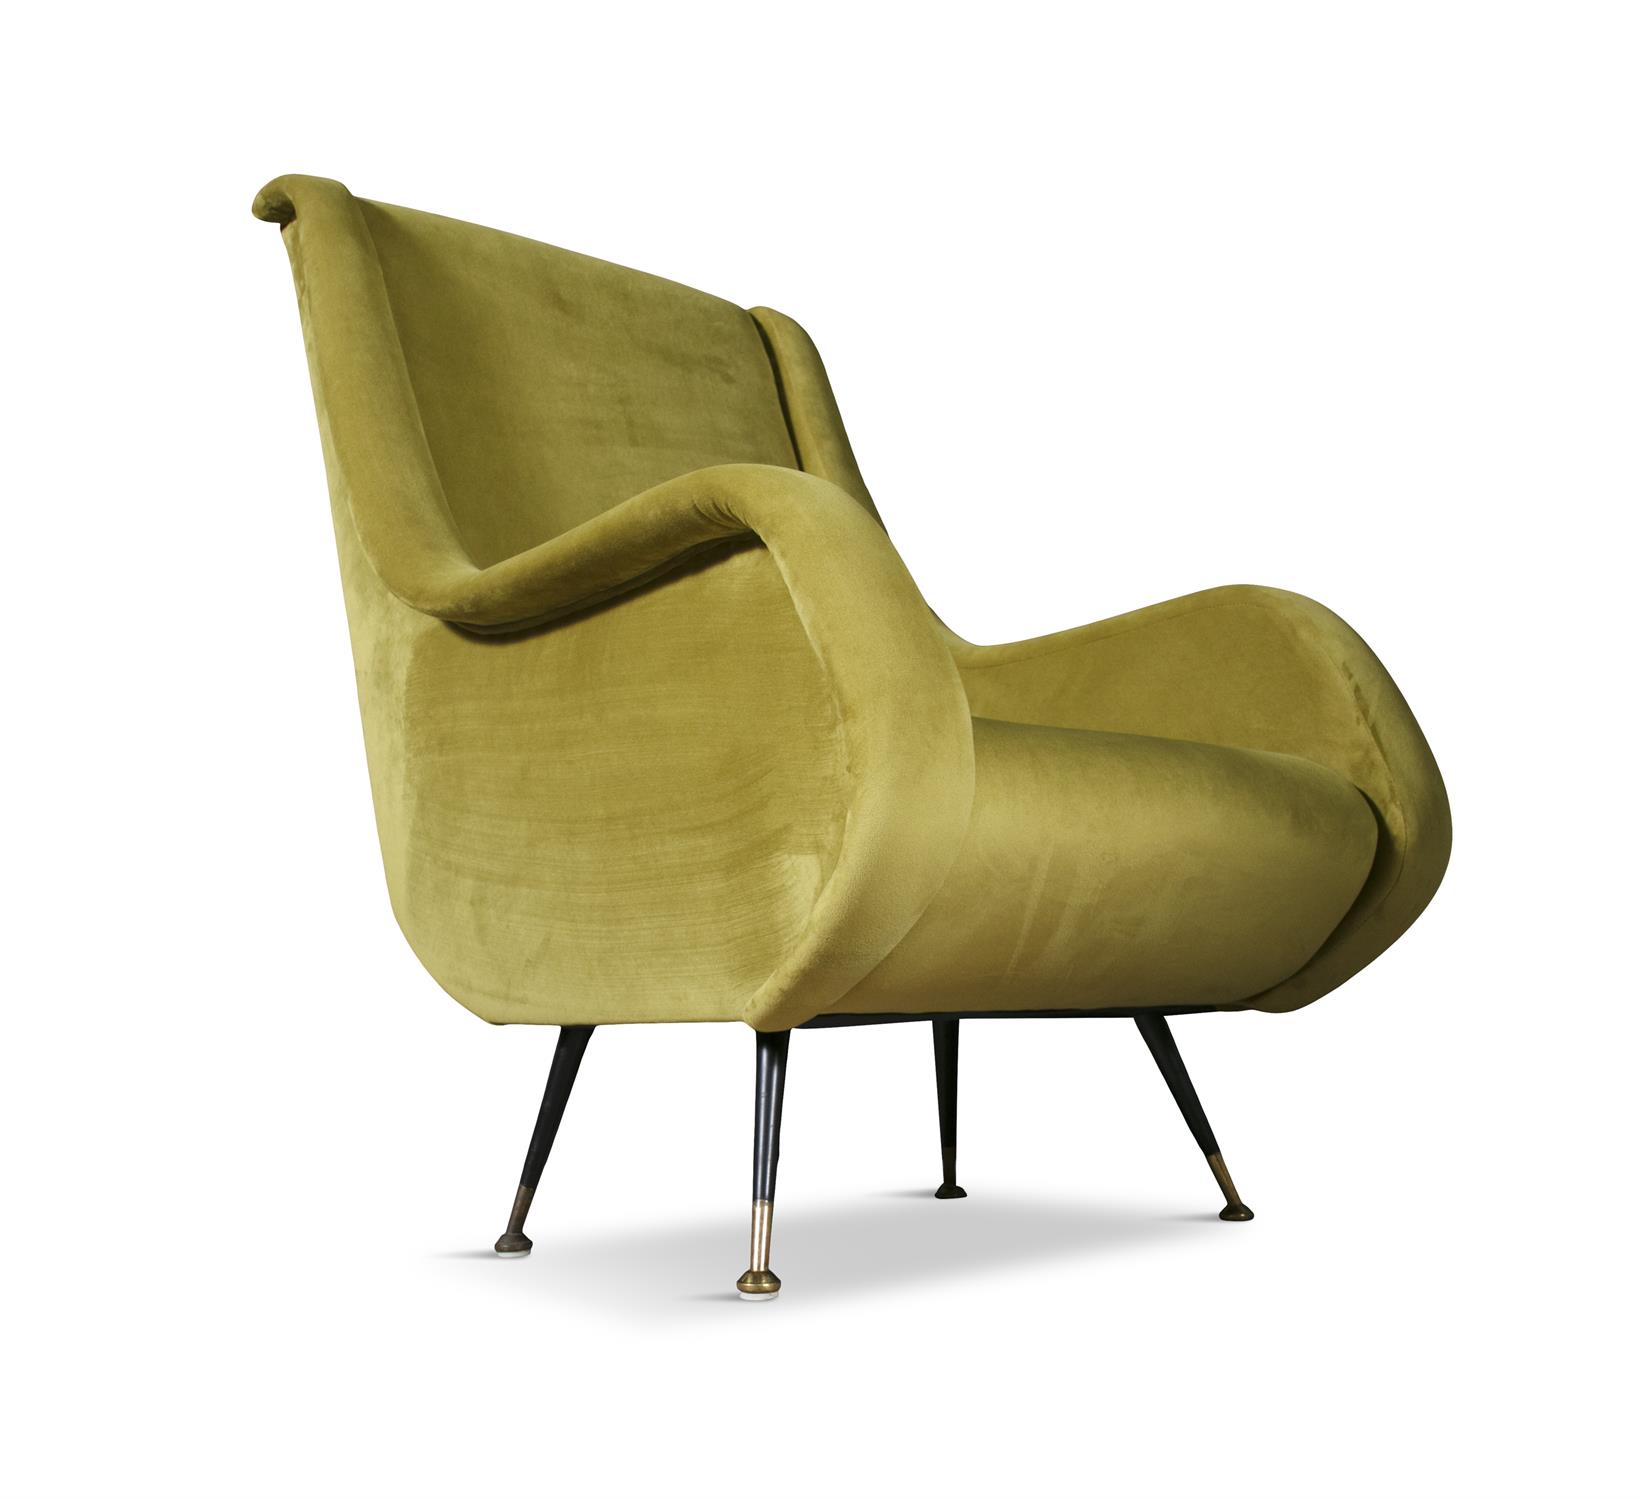 ARMCHAIRS A pair olive upholstered Italian armchairs. 67 x 90 x 97cm(h); seat 40cm(h) - Image 5 of 5